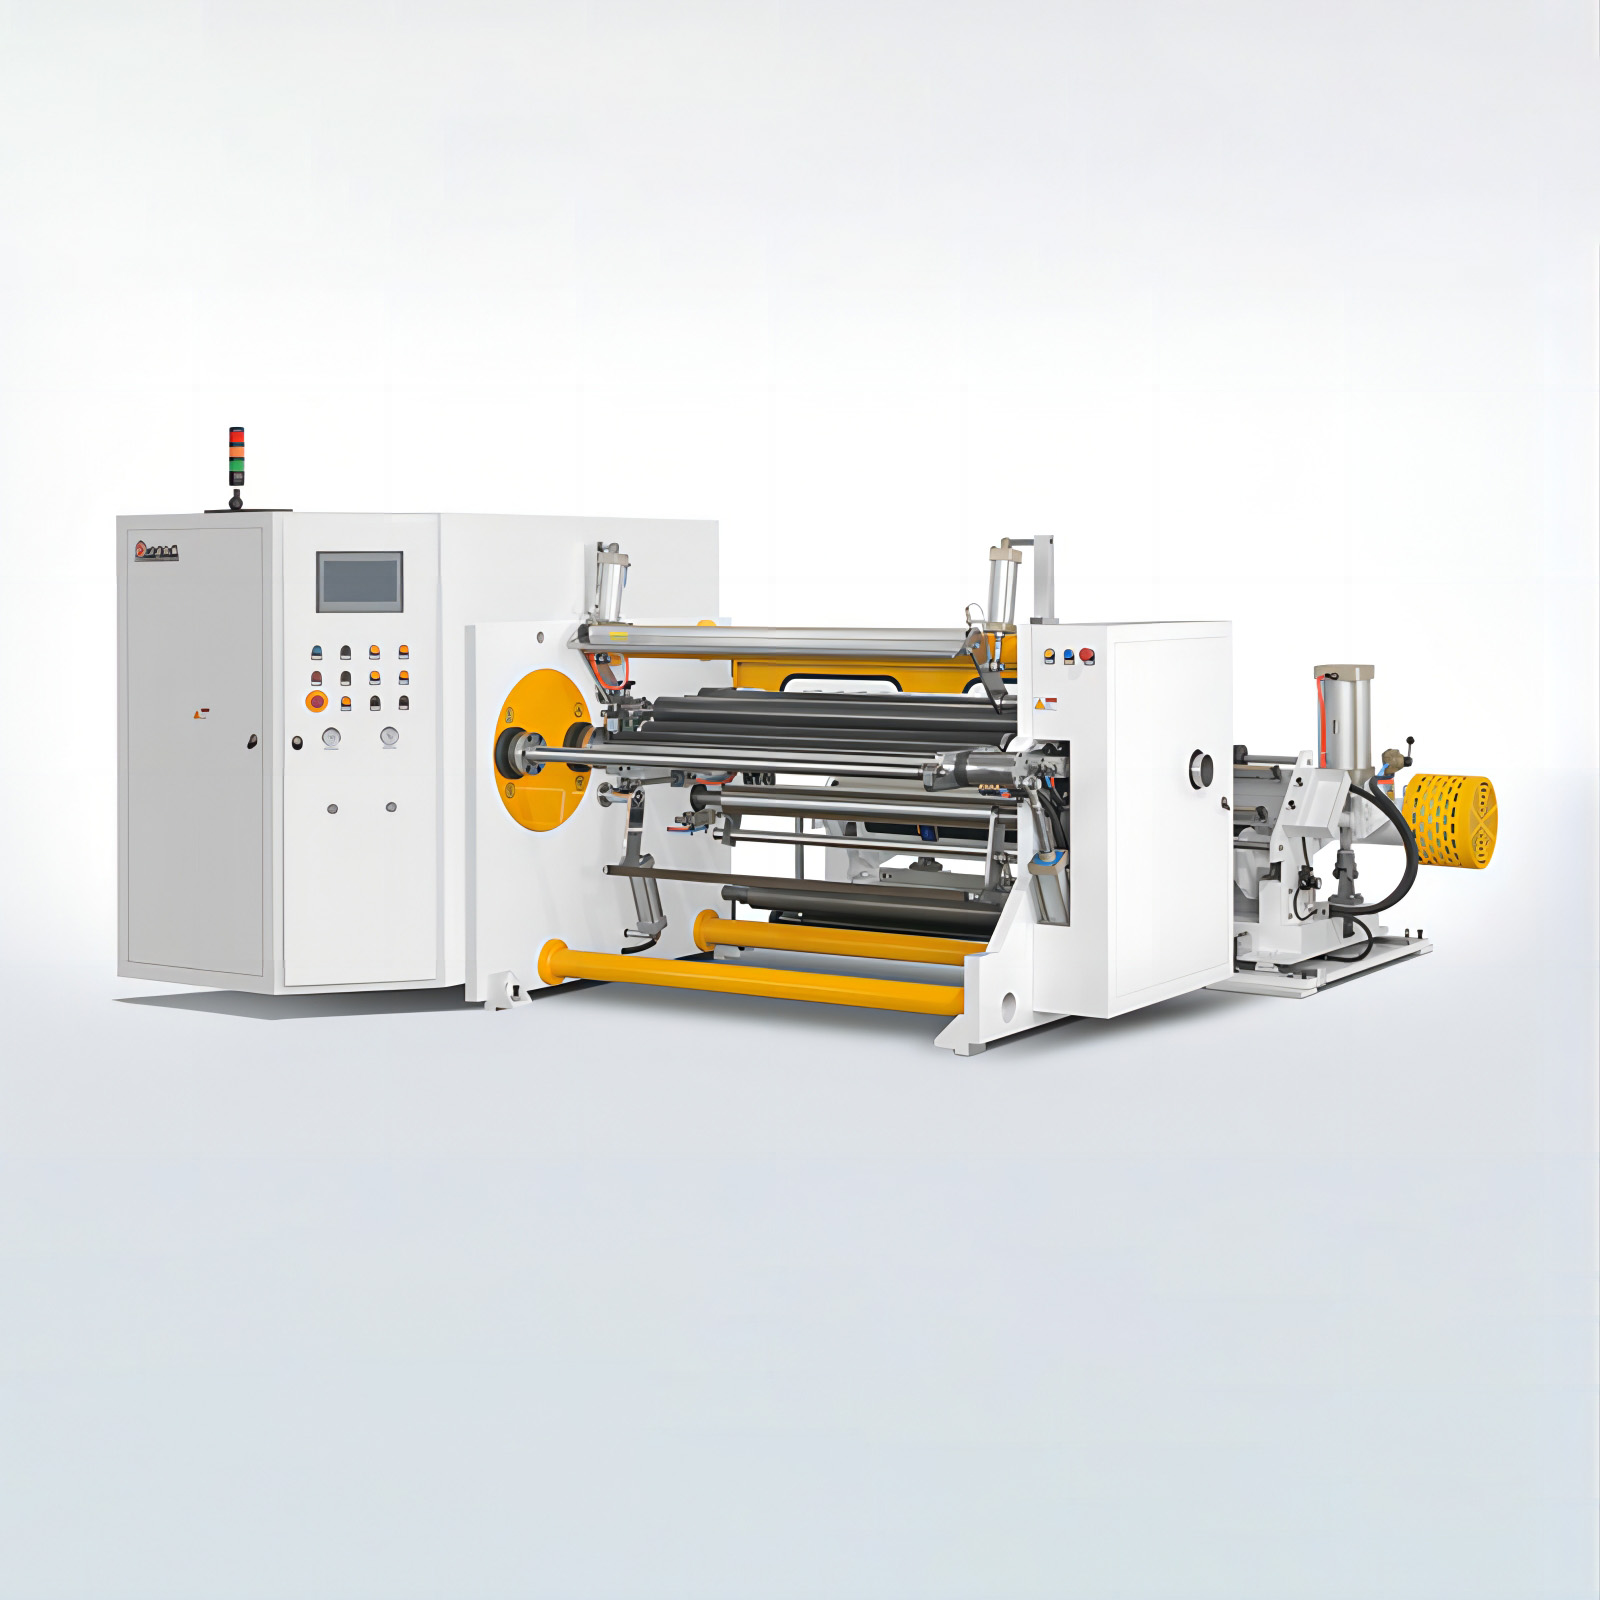 Efficient Thermal Transfer Ribbon Slitting Machine: Enhance Your Production